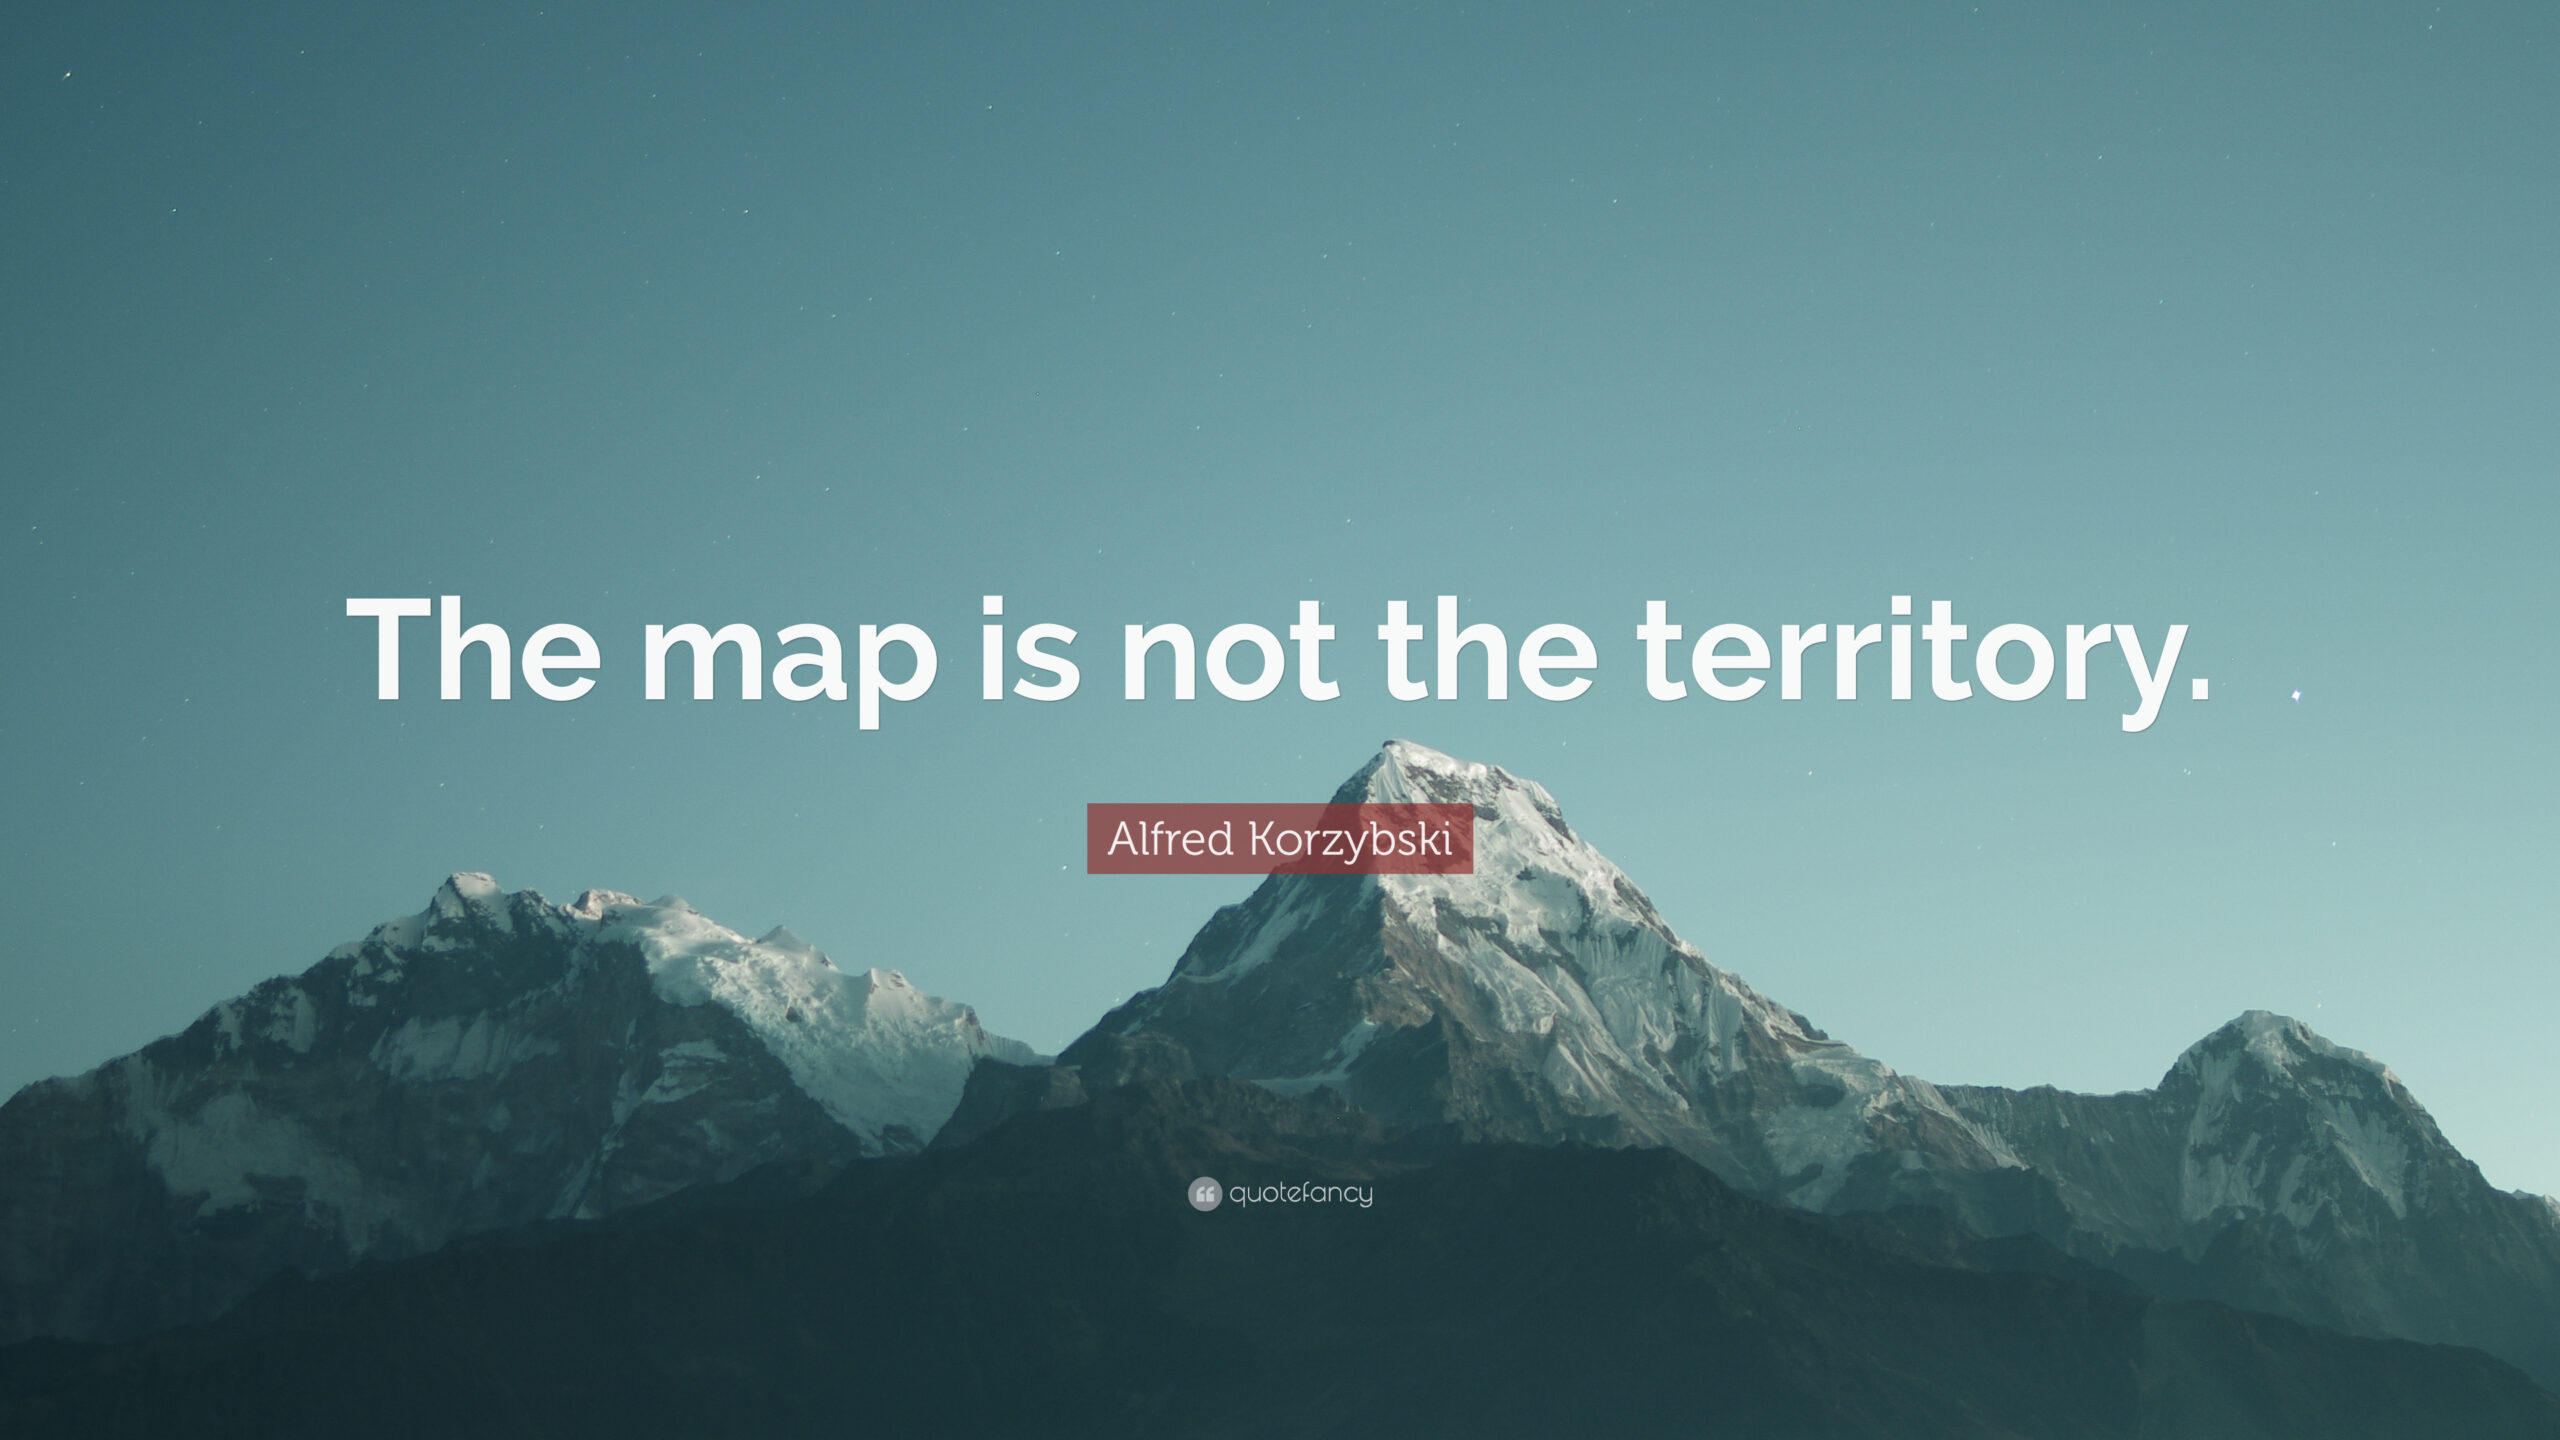 “THE MAP IS NOT THE TERRITORY”.